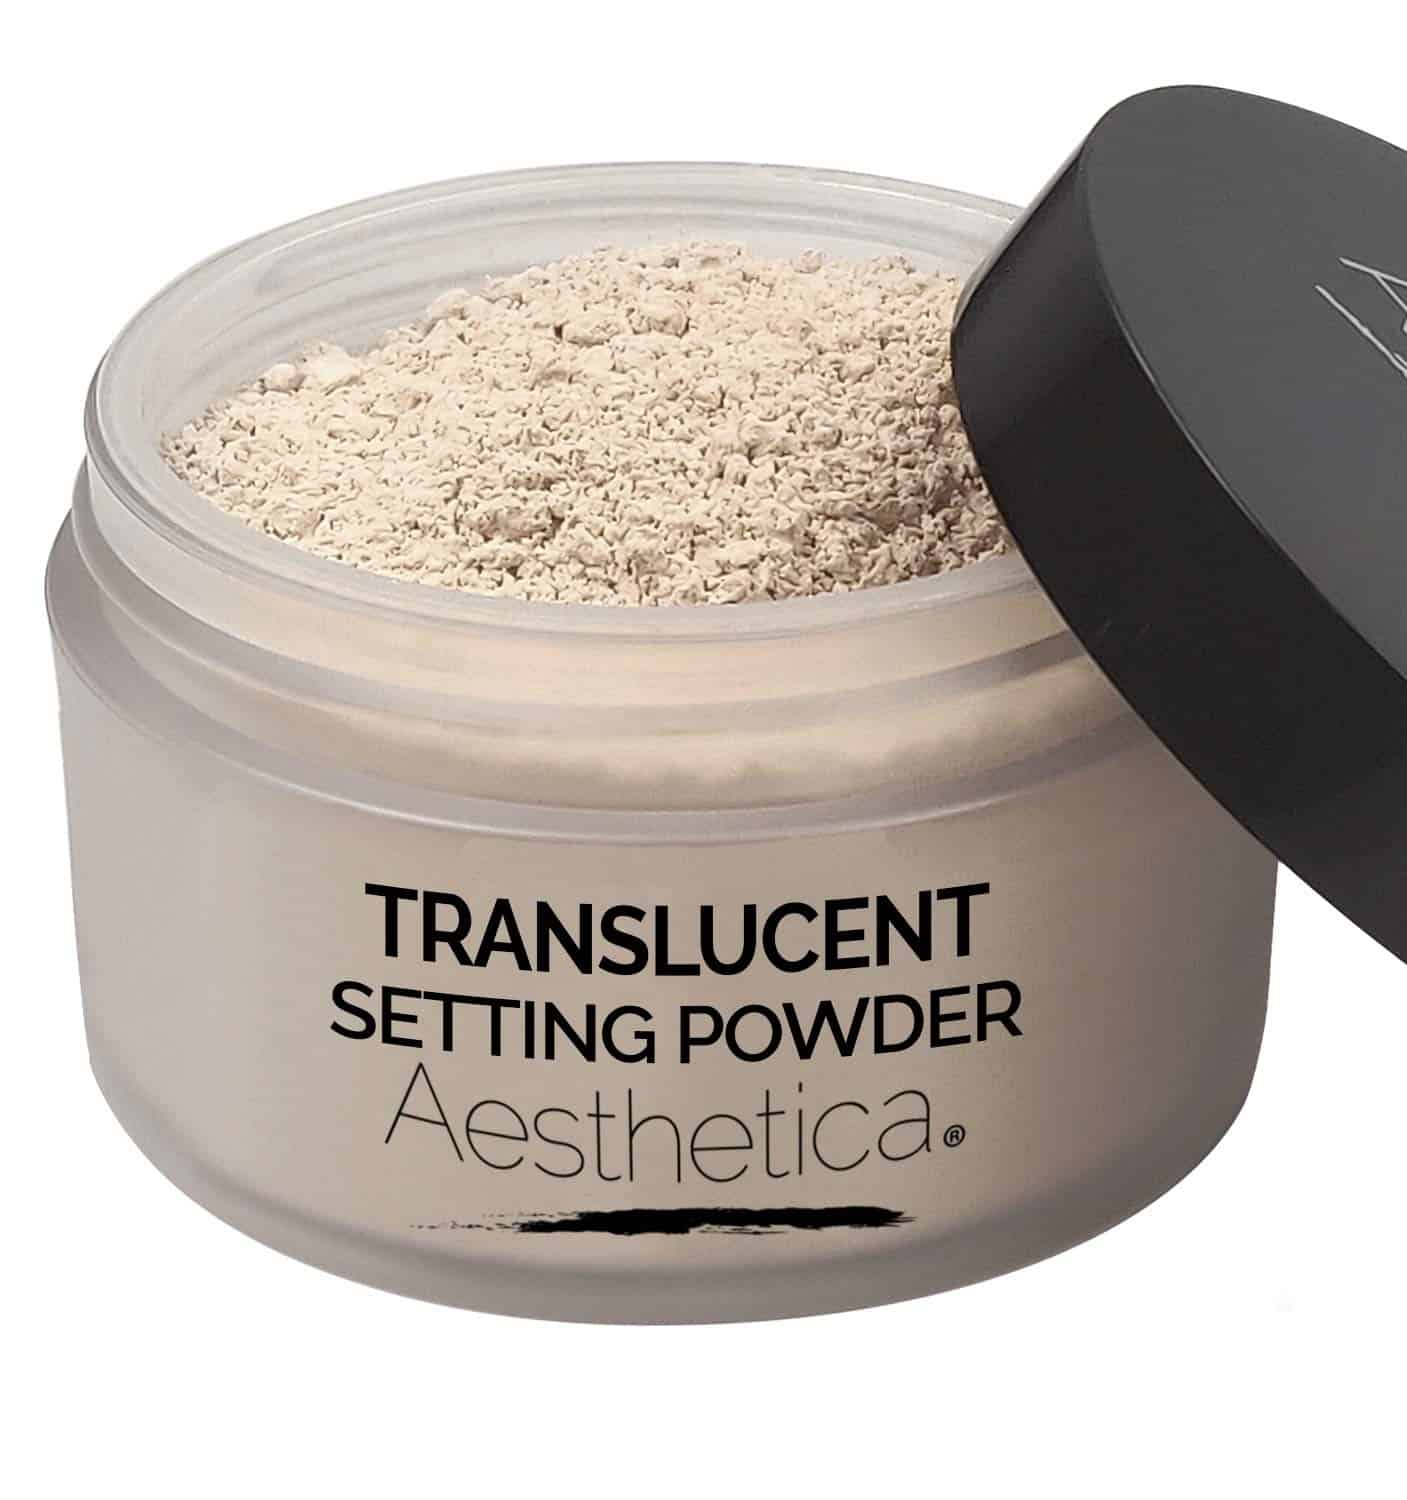 Top 5 Best Drugstore Setting Powder Reviews For Oily Skin Of 2020